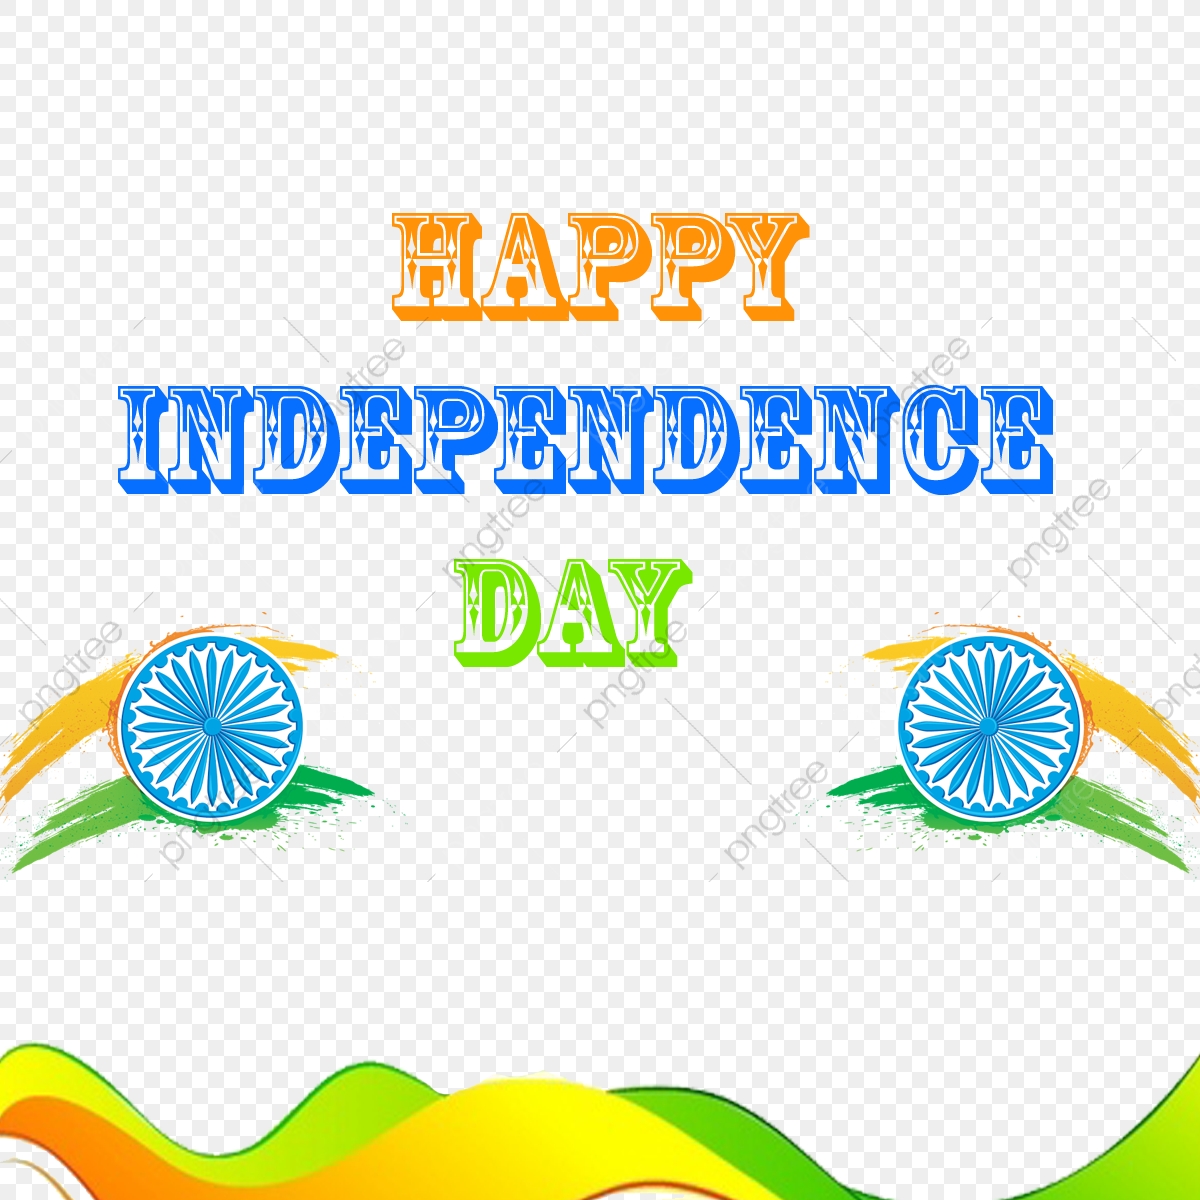 Happy Independence Day Wishes India 2018, Greetings, Happy.